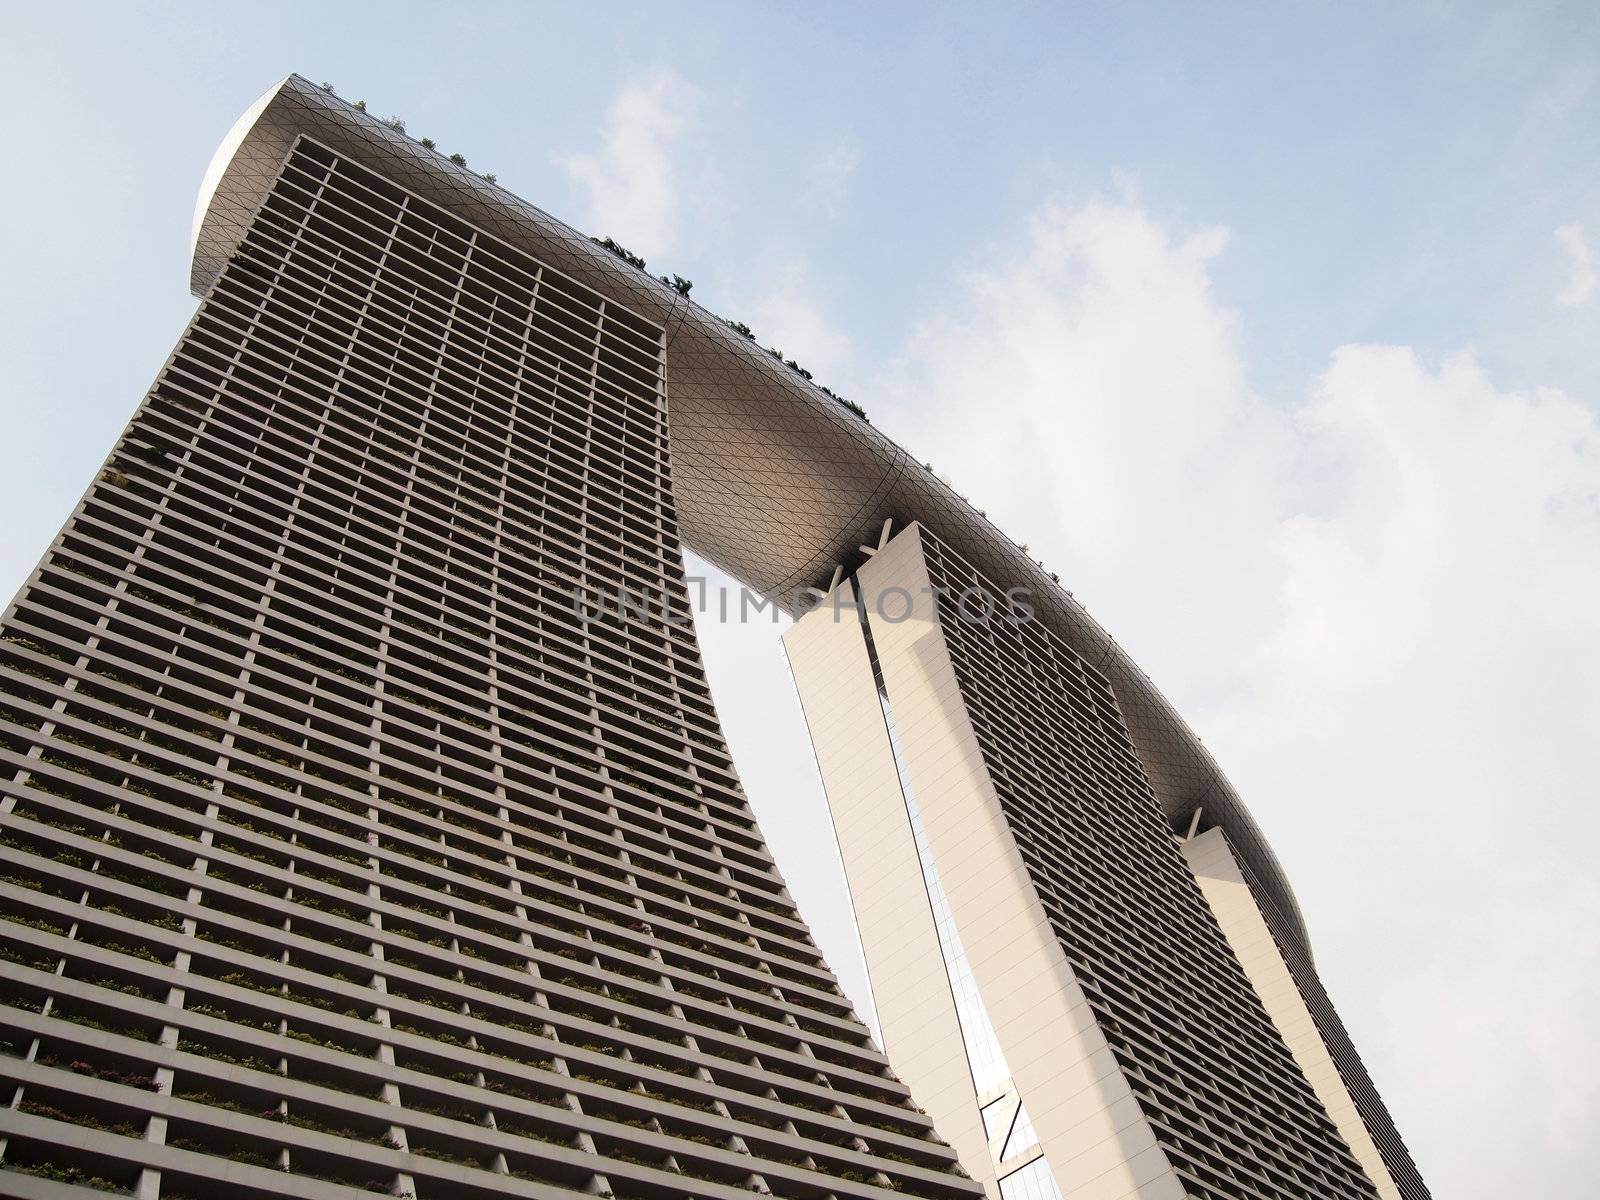 SINGAPORE - JAN 1, 2012: The new Marina Bay Sands resort on a late afternoon. Taken on January 1, 2012 in Singapore